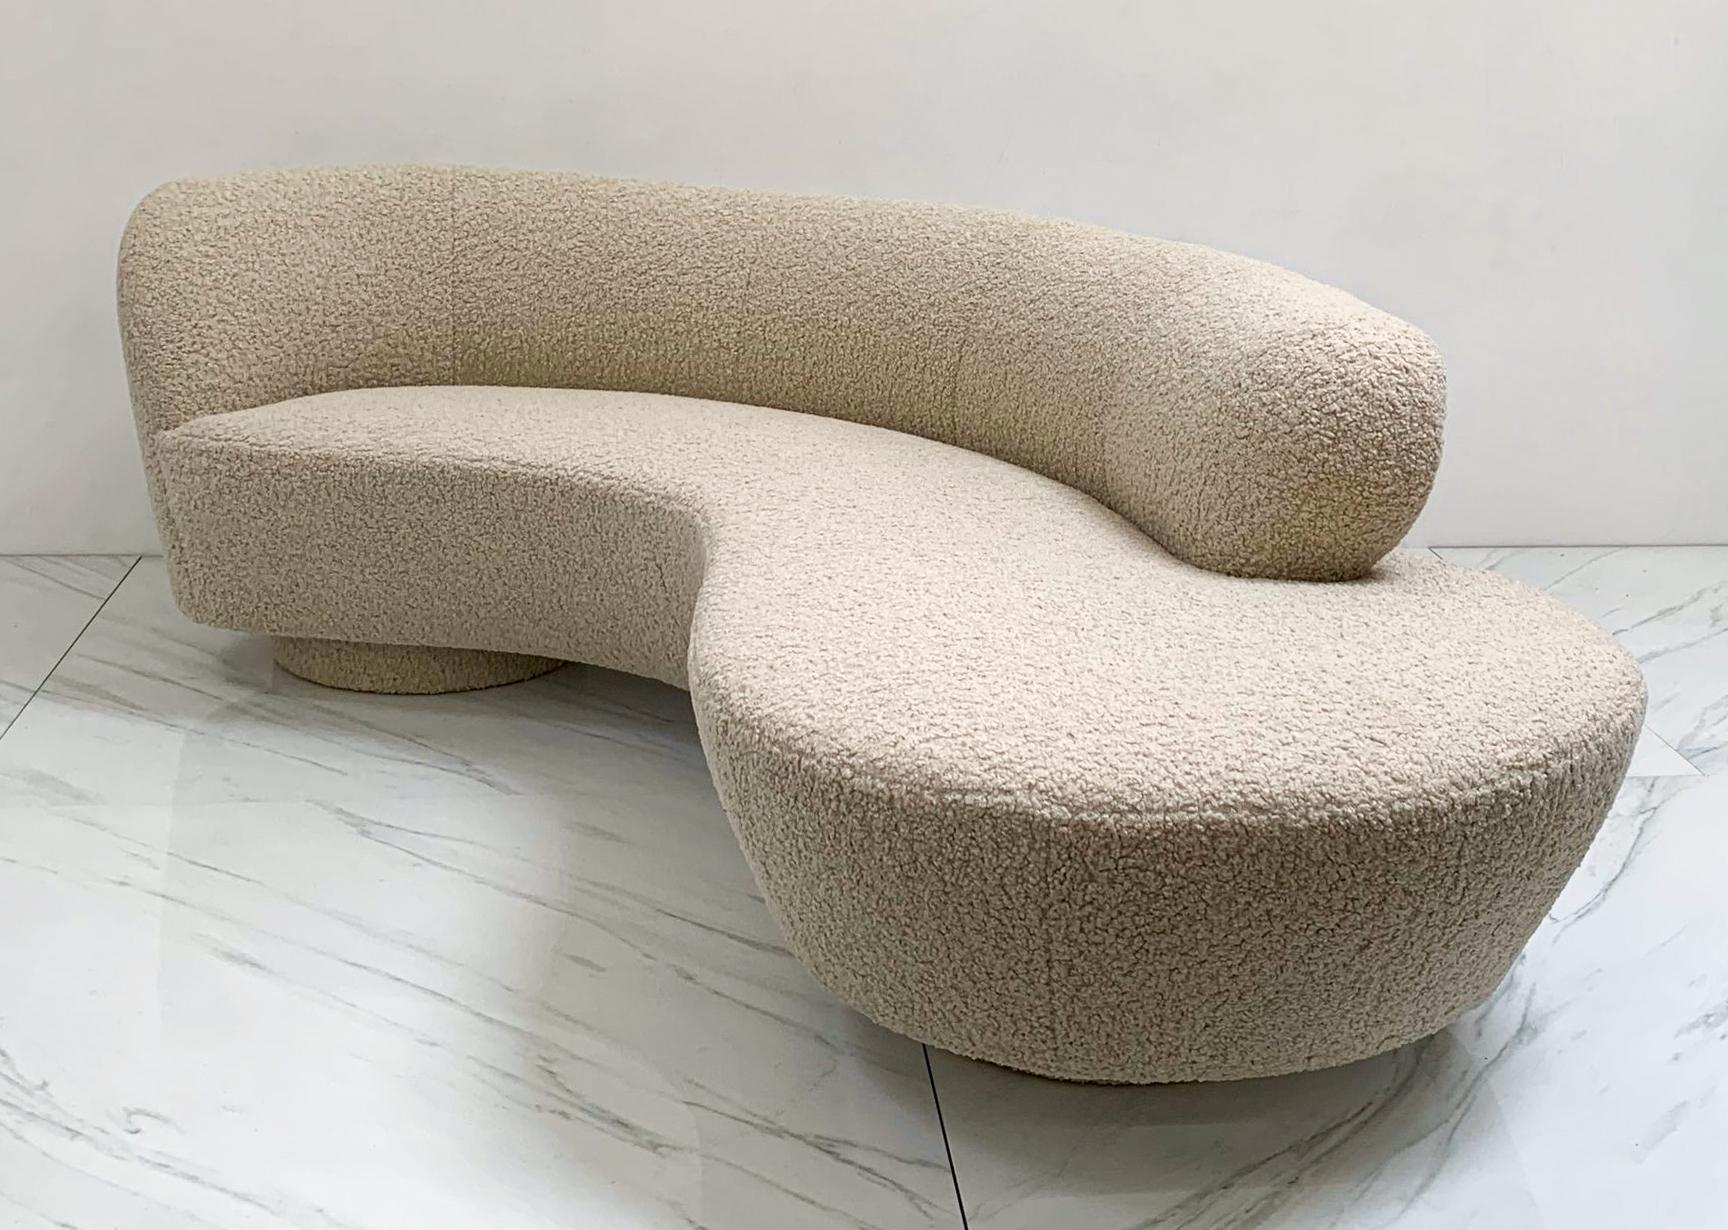 teddy bear material couch